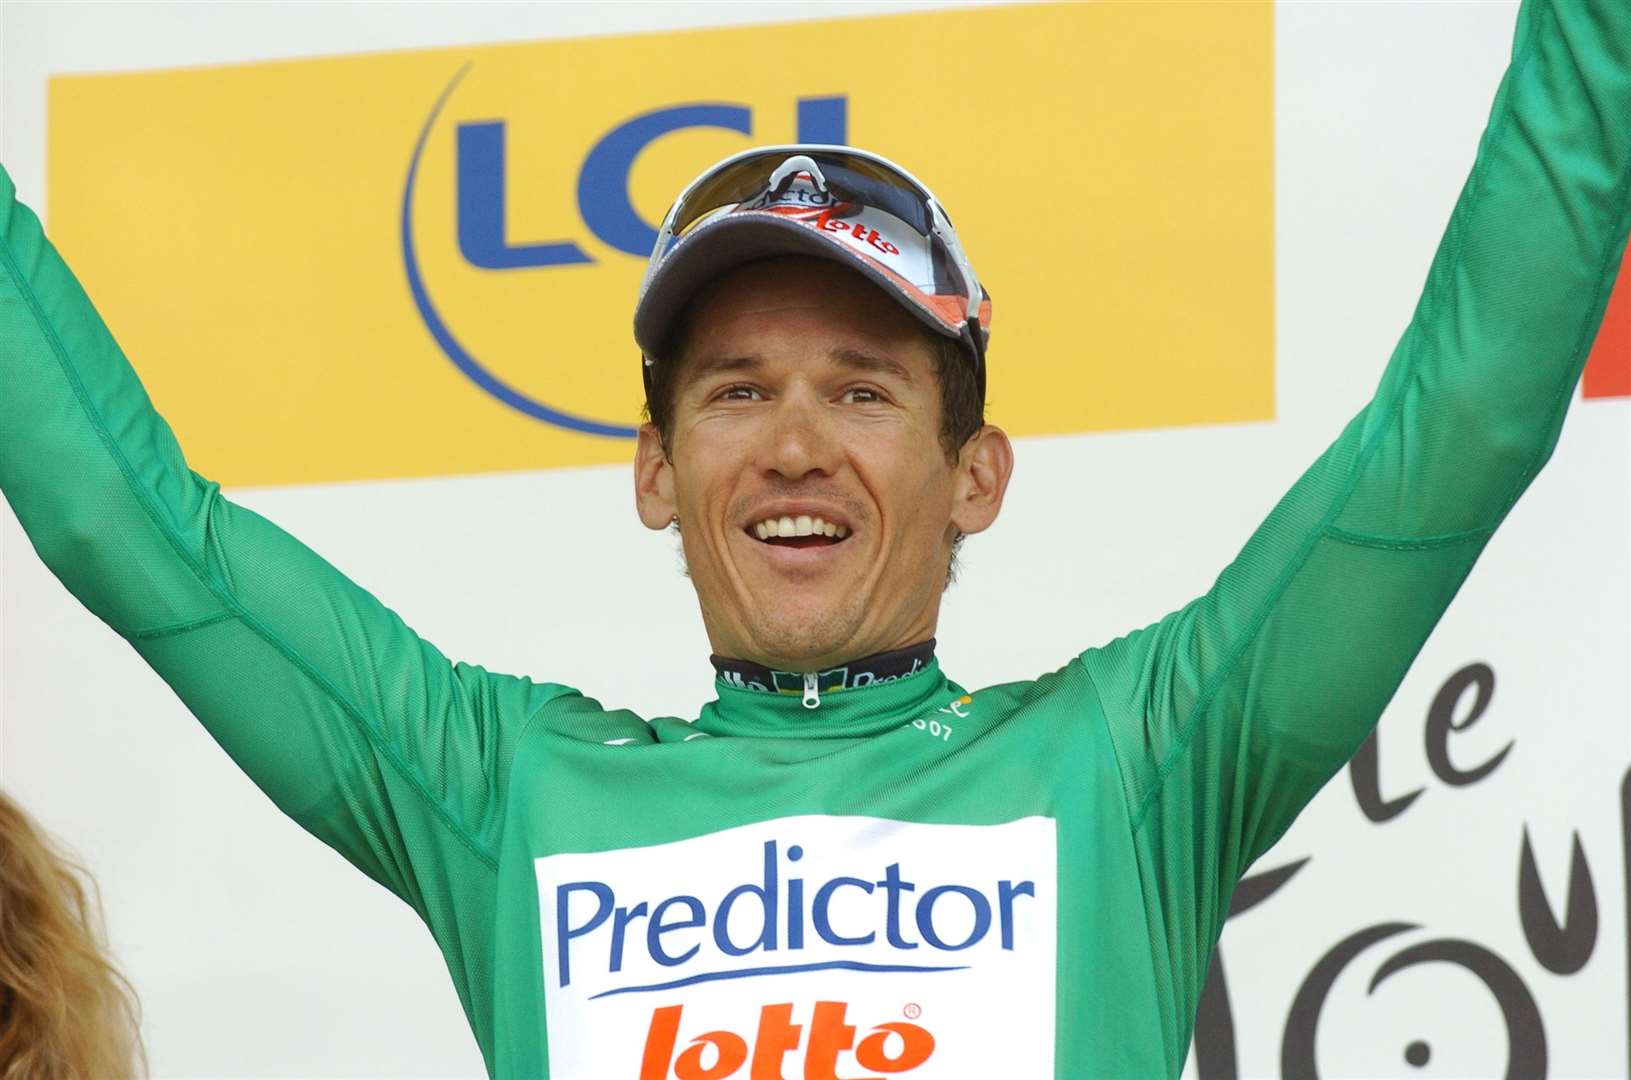 Stage winner Robbie McEwen took the green jersey. Pic: Barry Goodwin